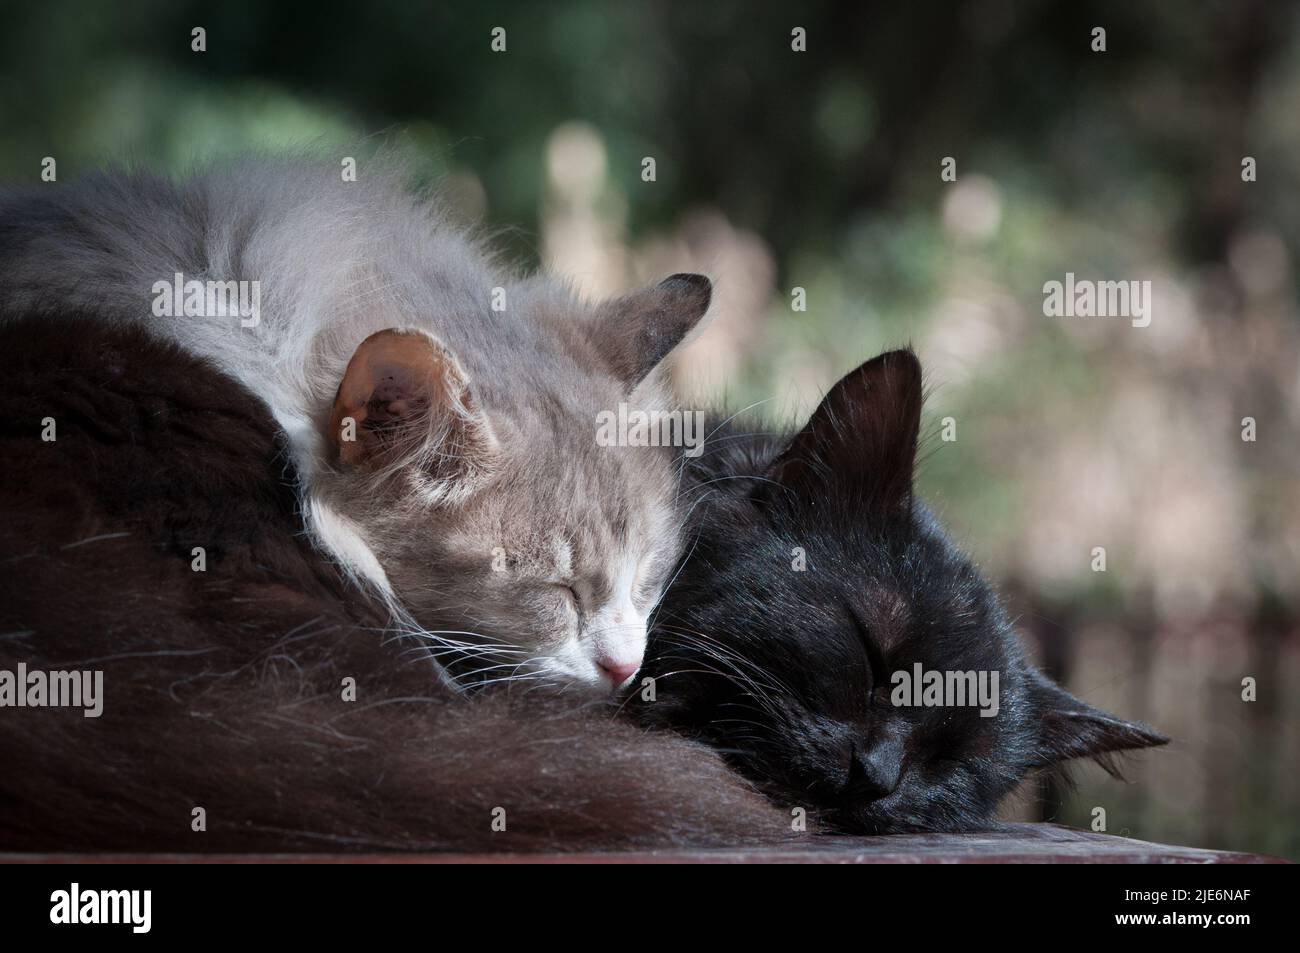 White and black lazy cats sleeping. Concept of love and care Stock Photo